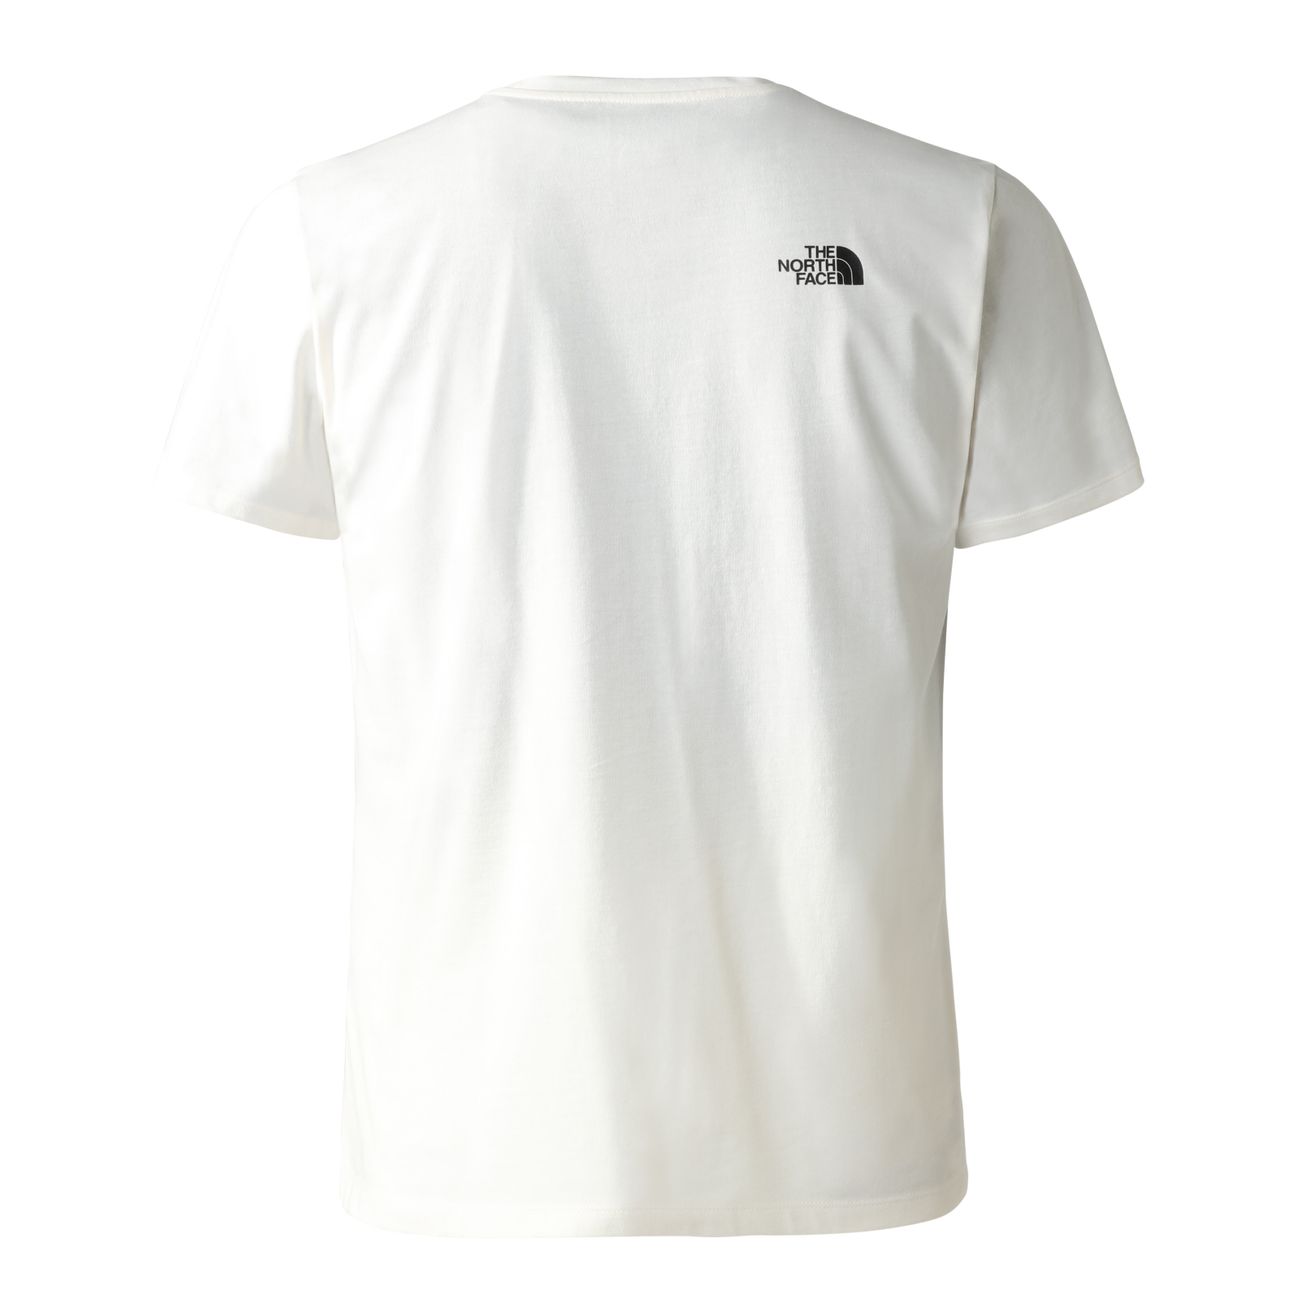 THE NORTH FACE M FOUNDATION GRAPHIC TEE Herren T-Shirt - The North Face - SAGATOO - 196013650599